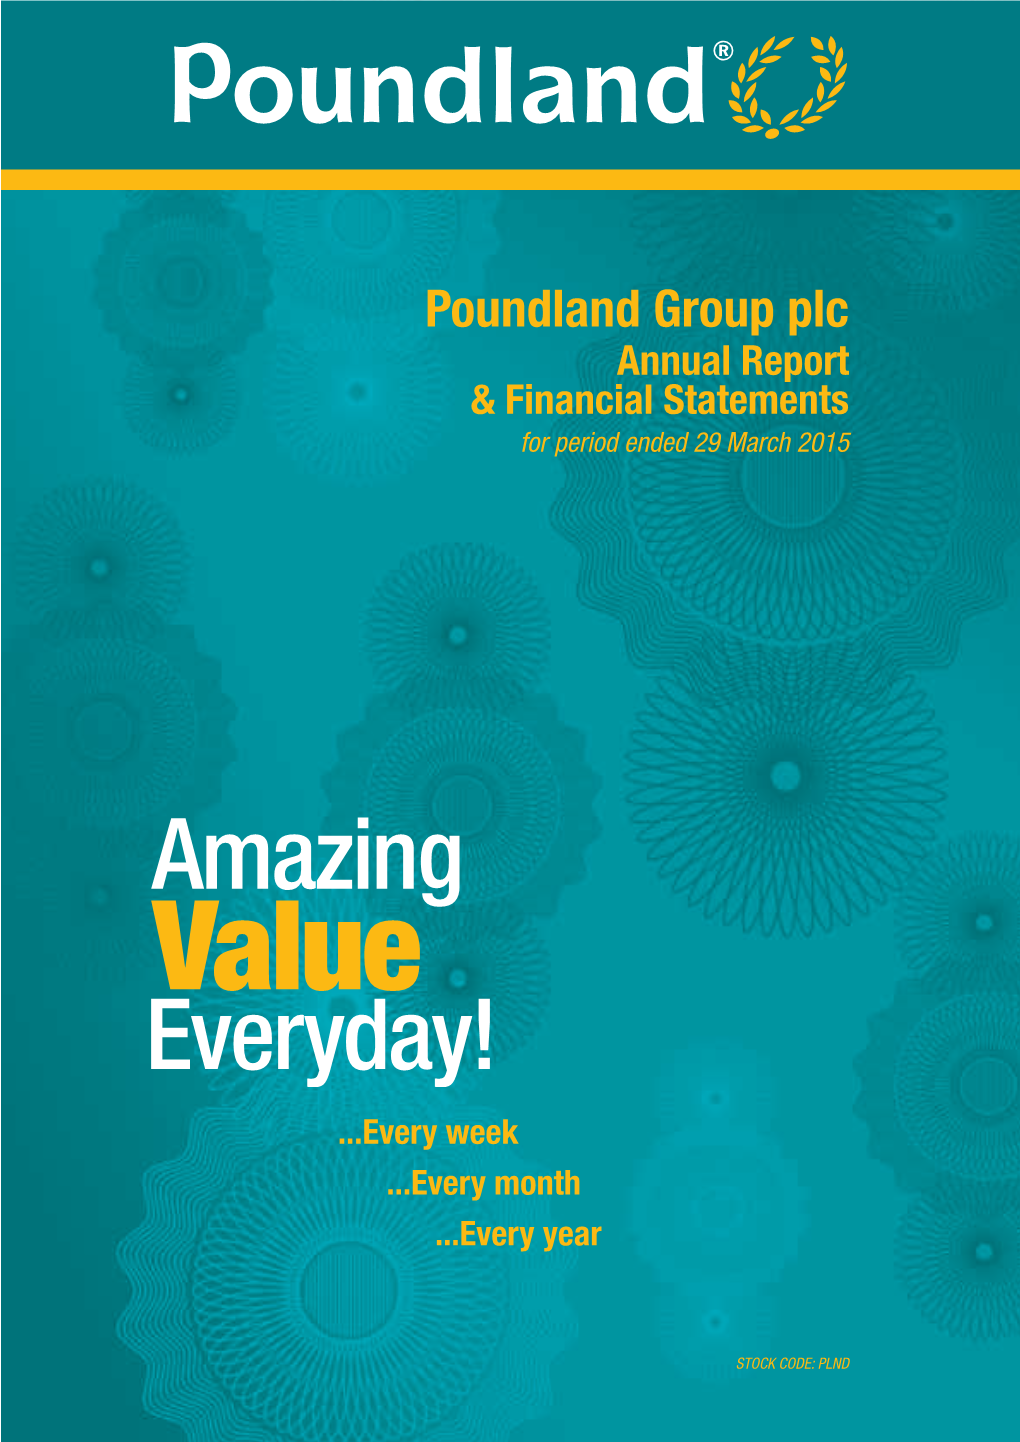 Poundland Group Plc Annual Report & Financial Statements for Period Ended 29 March 2015